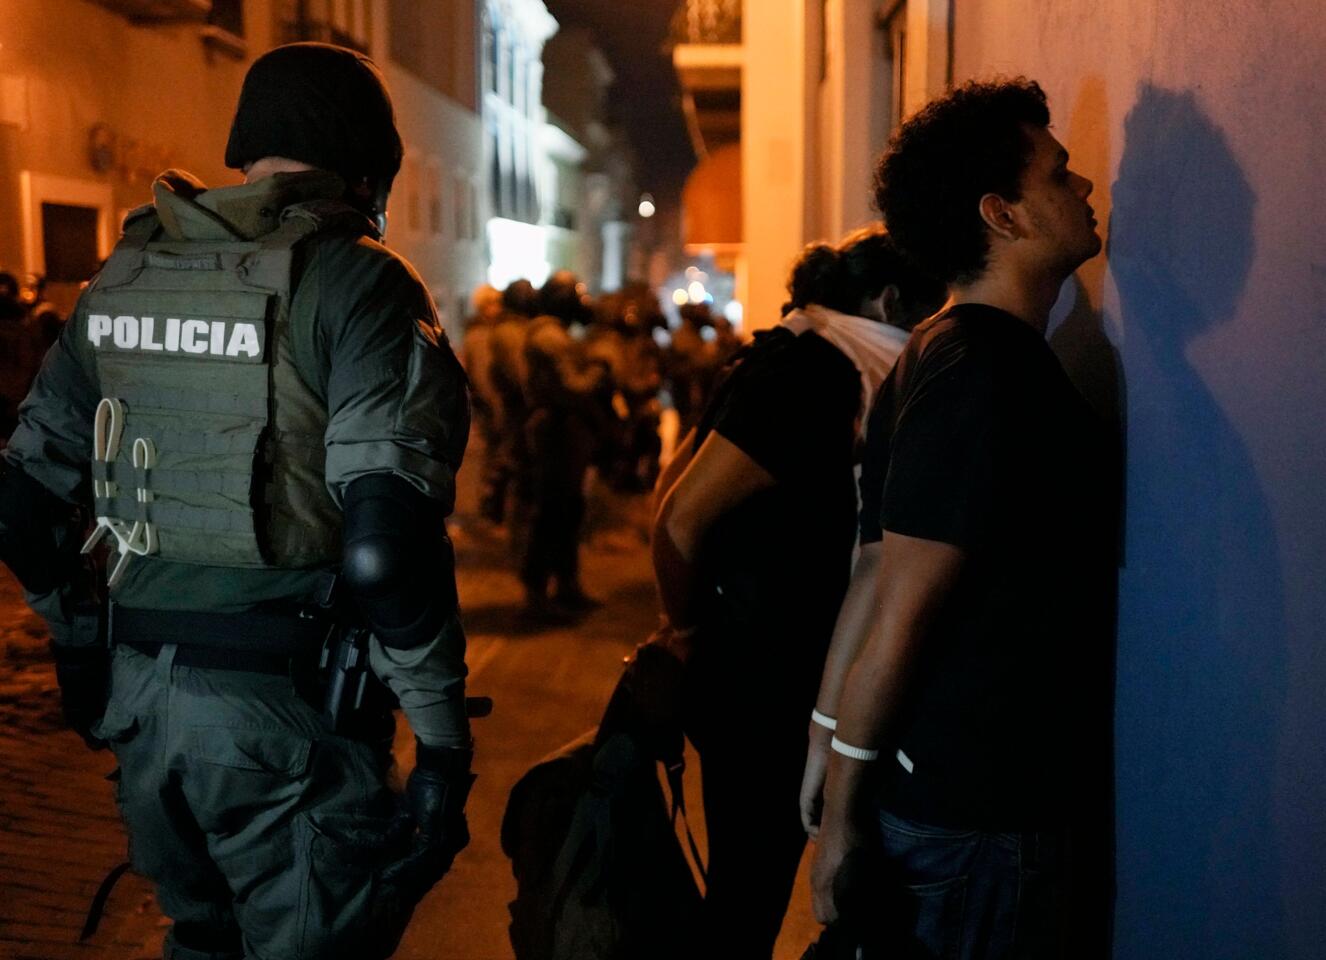 Protesters are detained by police in San Juan as thousands marched in Puerto Rico for a fifth day.